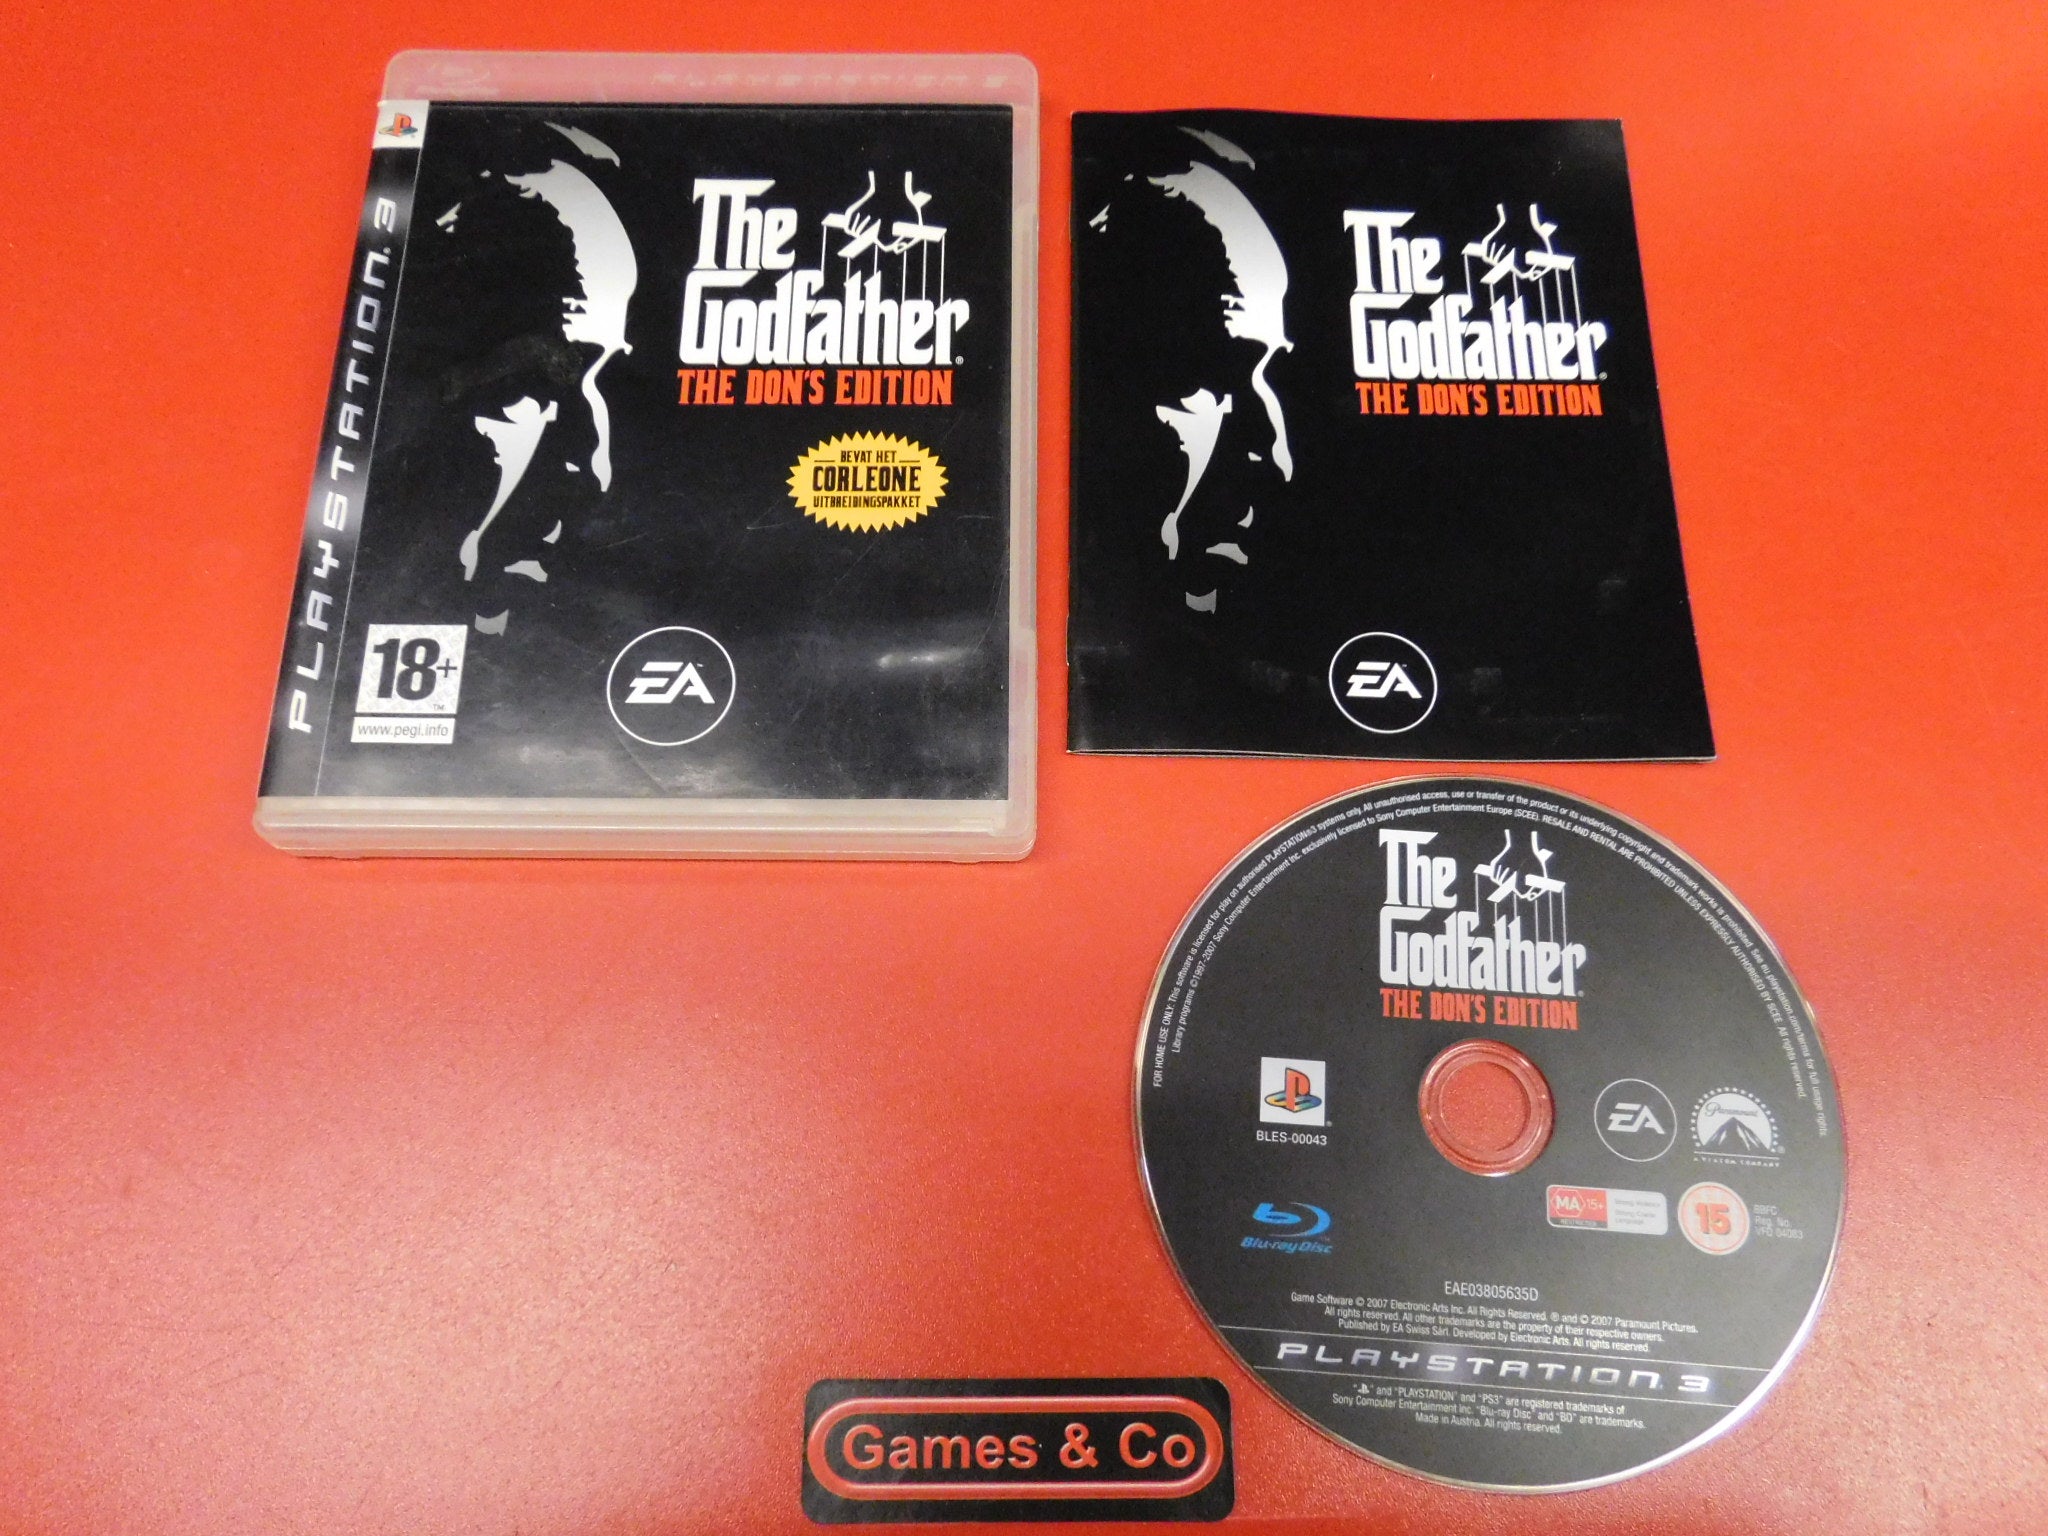 THE GODFATHER THE DON'S EDITION